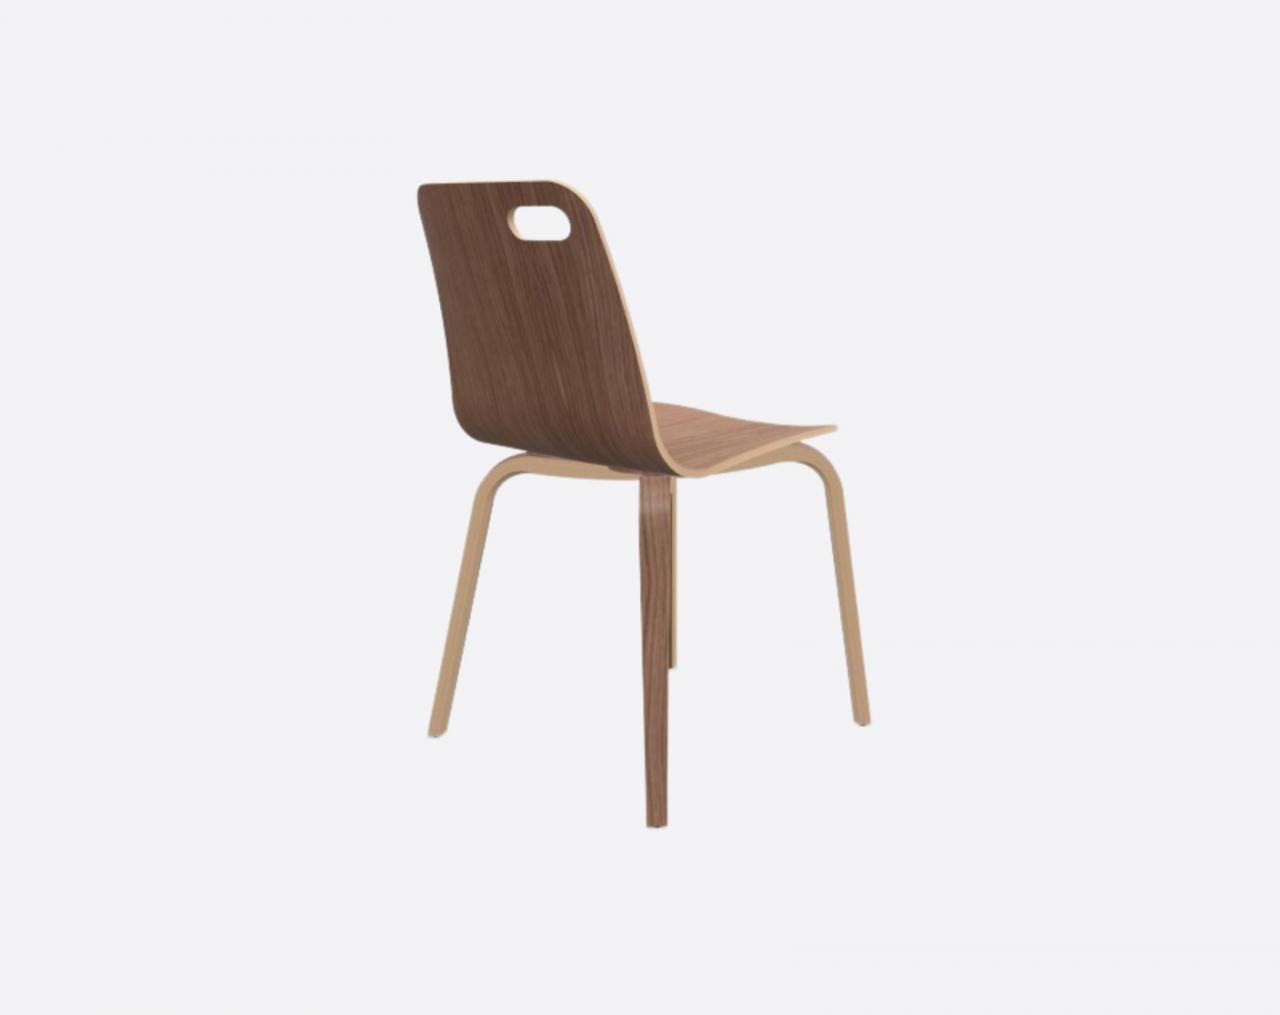 PATROL walnut chair - Sophisticated and comfortable chair for any interior.